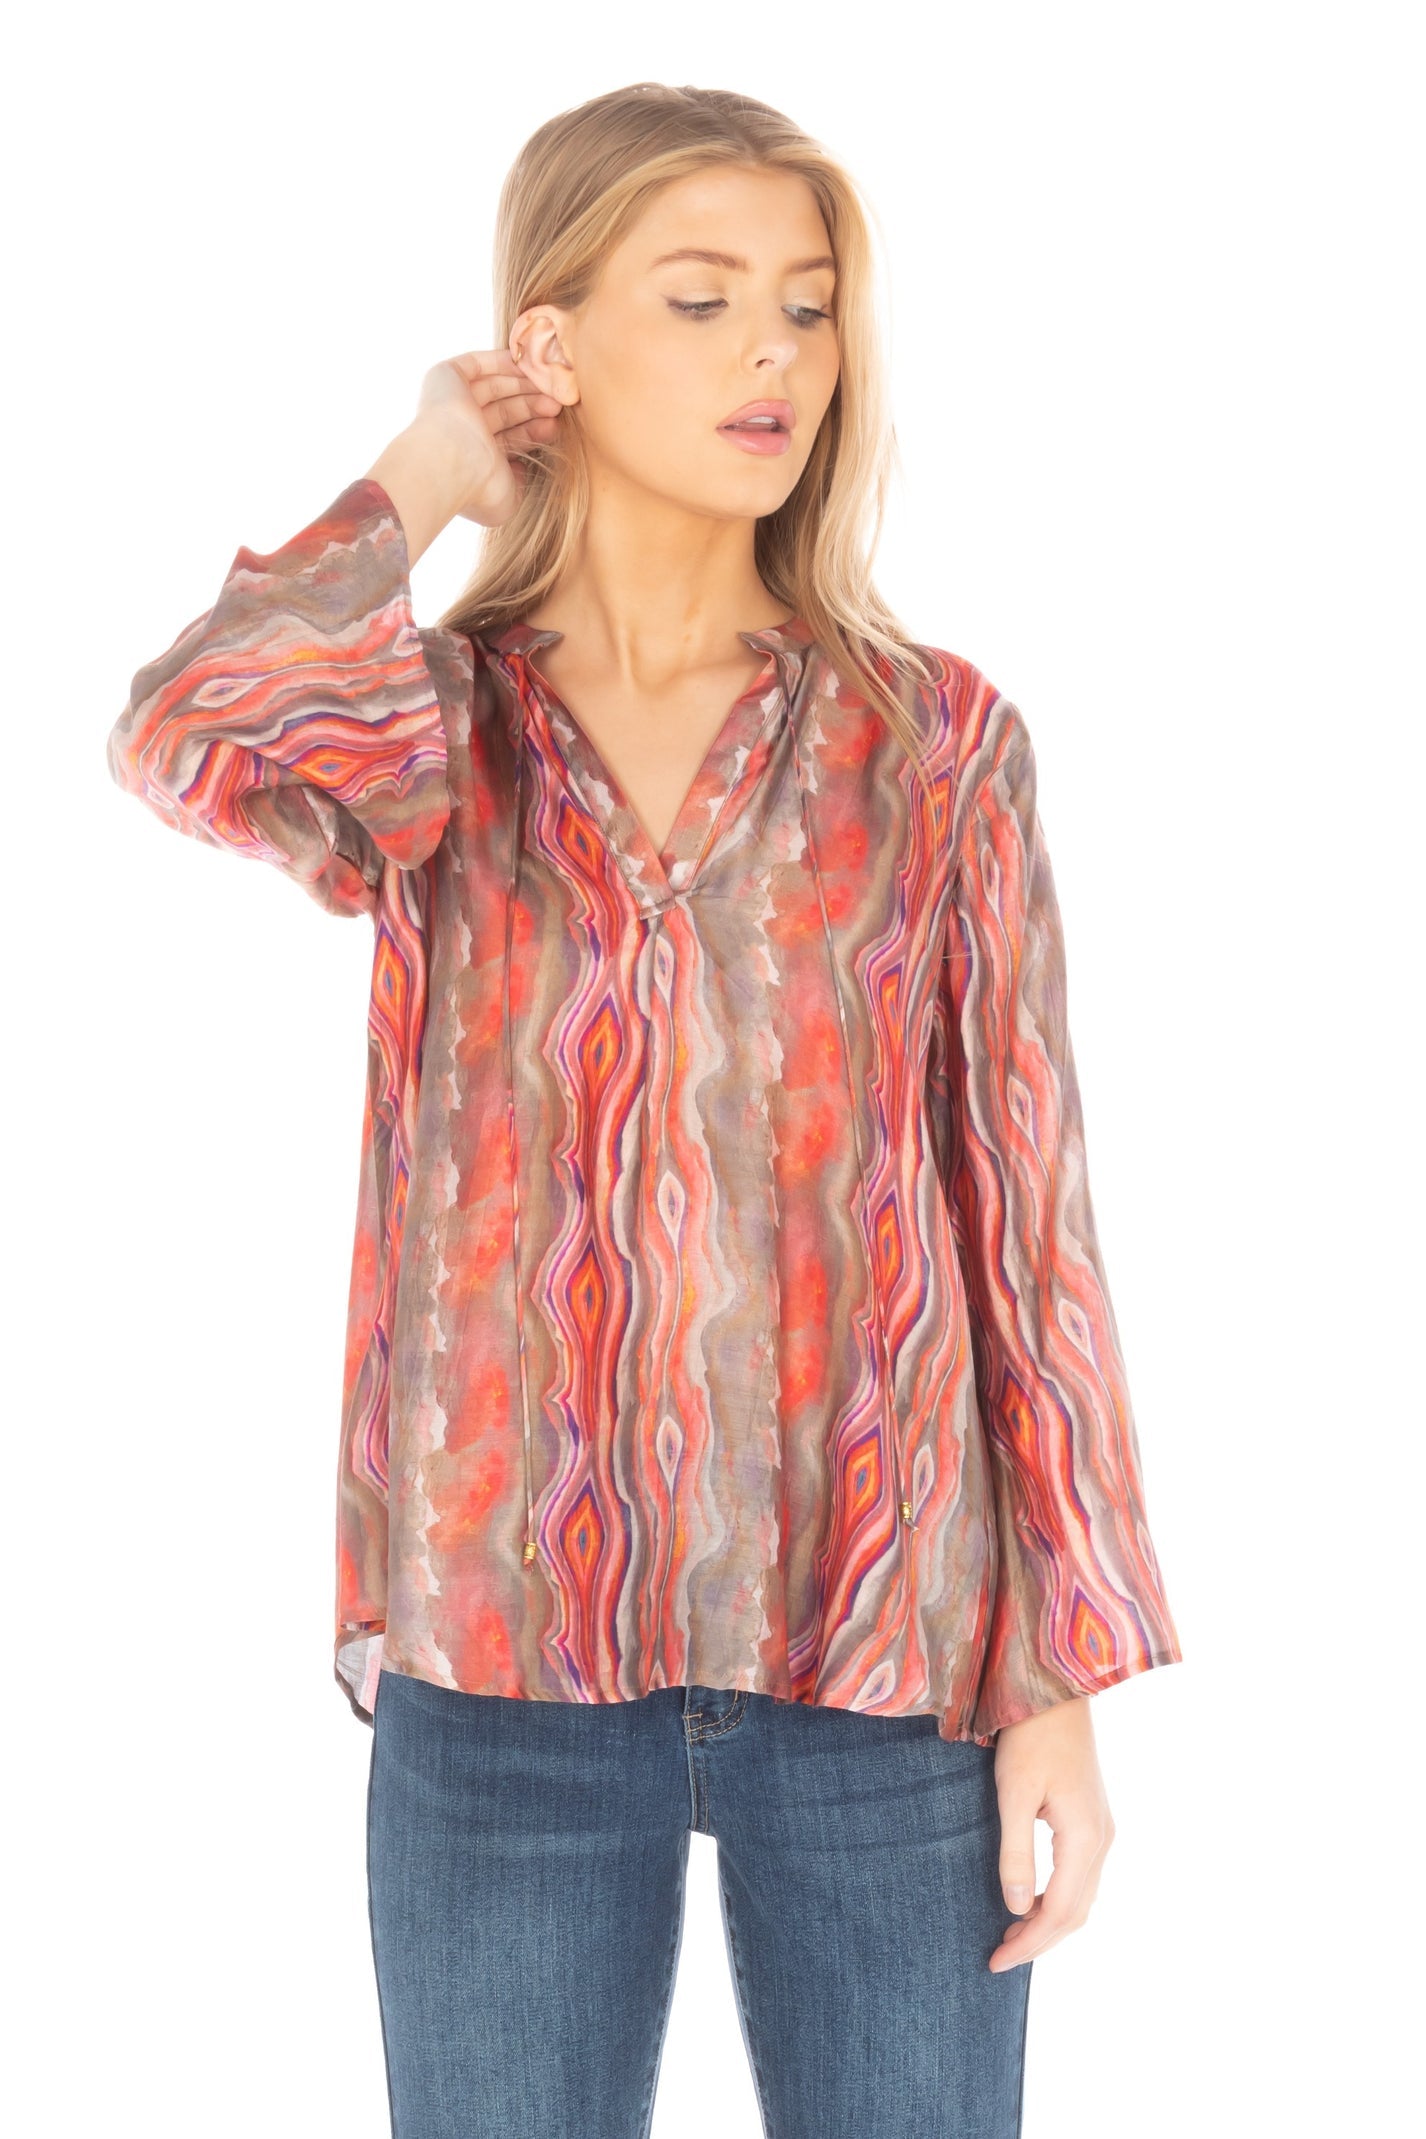 APNY Ladies V-Neck Blouse With Tassel and Bell Sleeves